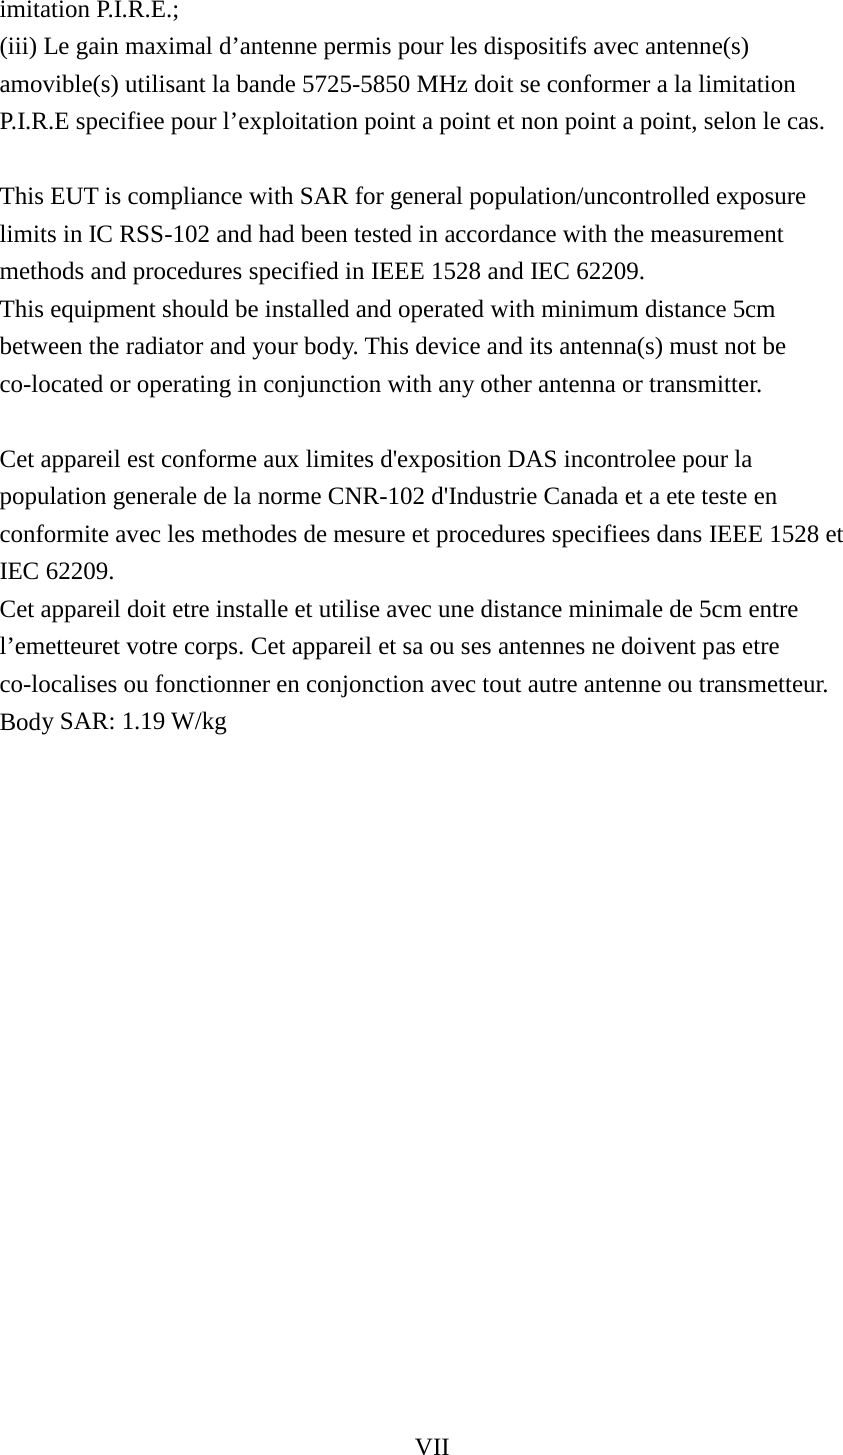 VII  imitation P.I.R.E.;   (iii) Le gain maximal d’antenne permis pour les dispositifs avec antenne(s) amovible(s) utilisant la bande 5725-5850 MHz doit se conformer a la limitation P.I.R.E specifiee pour l’exploitation point a point et non point a point, selon le cas.    This EUT is compliance with SAR for general population/uncontrolled exposure limits in IC RSS-102 and had been tested in accordance with the measurement methods and procedures specified in IEEE 1528 and IEC 62209.   This equipment should be installed and operated with minimum distance 5cm between the radiator and your body. This device and its antenna(s) must not be co-located or operating in conjunction with any other antenna or transmitter.    Cet appareil est conforme aux limites d&apos;exposition DAS incontrolee pour la population generale de la norme CNR-102 d&apos;Industrie Canada et a ete teste en conformite avec les methodes de mesure et procedures specifiees dans IEEE 1528 et IEC 62209.   Cet appareil doit etre installe et utilise avec une distance minimale de 5cm entre l’emetteuret votre corps. Cet appareil et sa ou ses antennes ne doivent pas etre co-localises ou fonctionner en conjonction avec tout autre antenne ou transmetteur.   Body SAR: 1.19 W/kg    